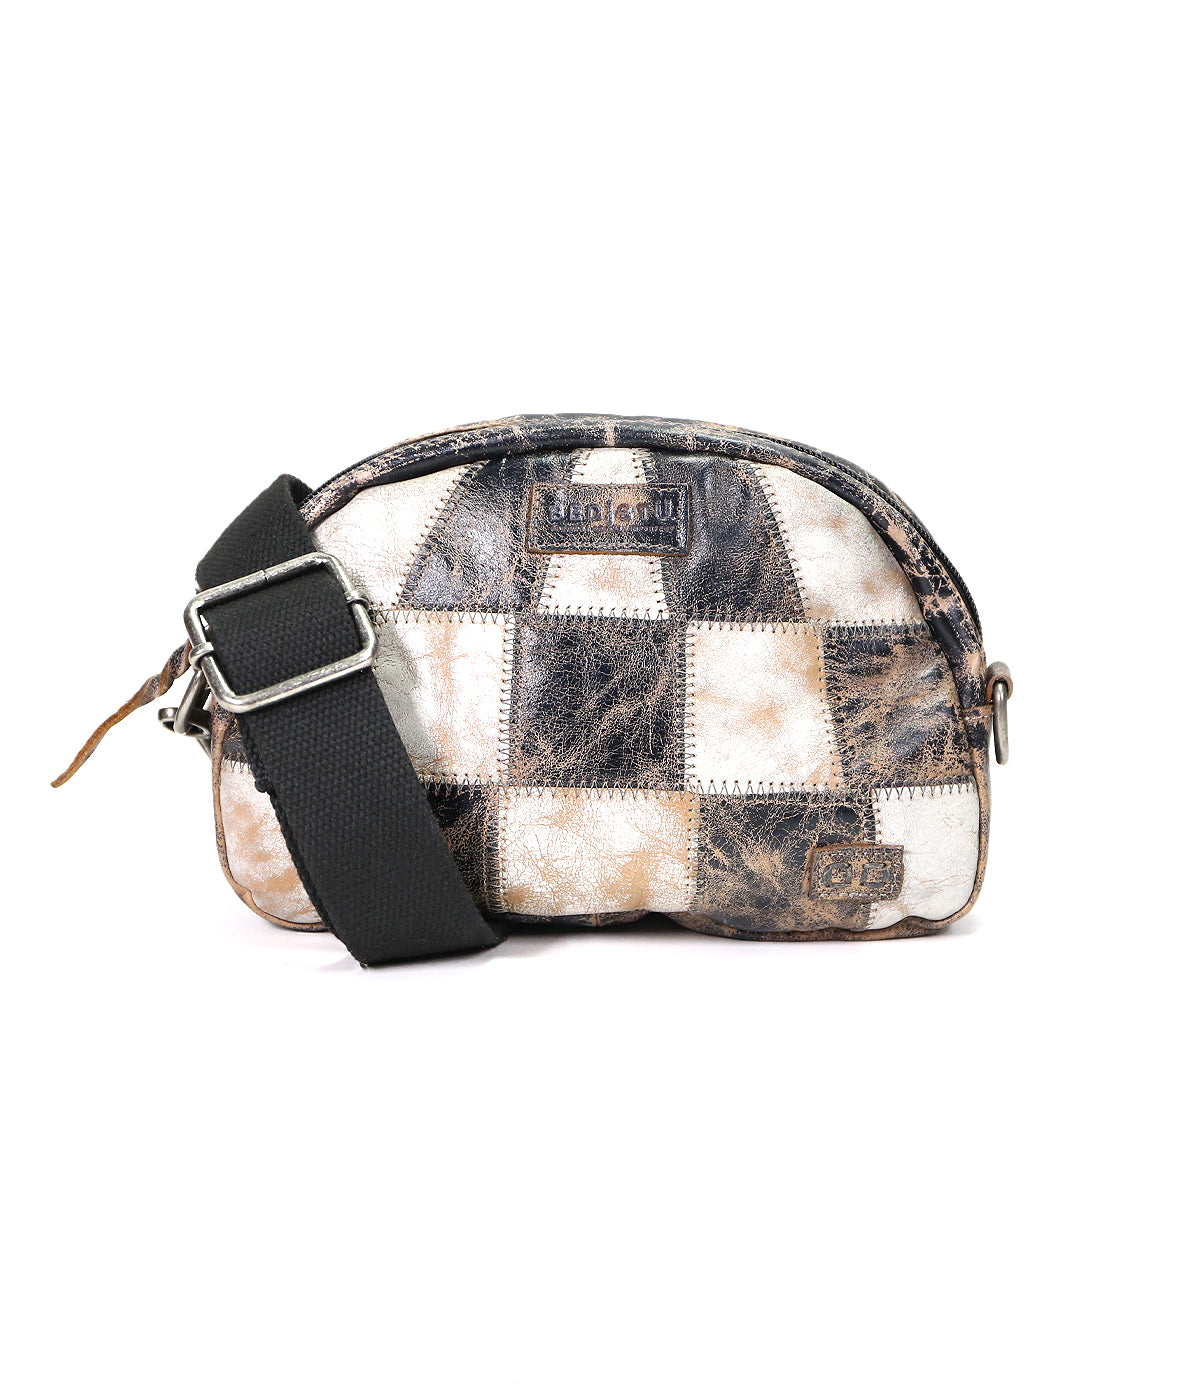 A small, checkered-patterned sling bag with a black strap, featuring various shades of brown and white. The Abundance bag from Bed Stu has visible branding and a zipper closure.